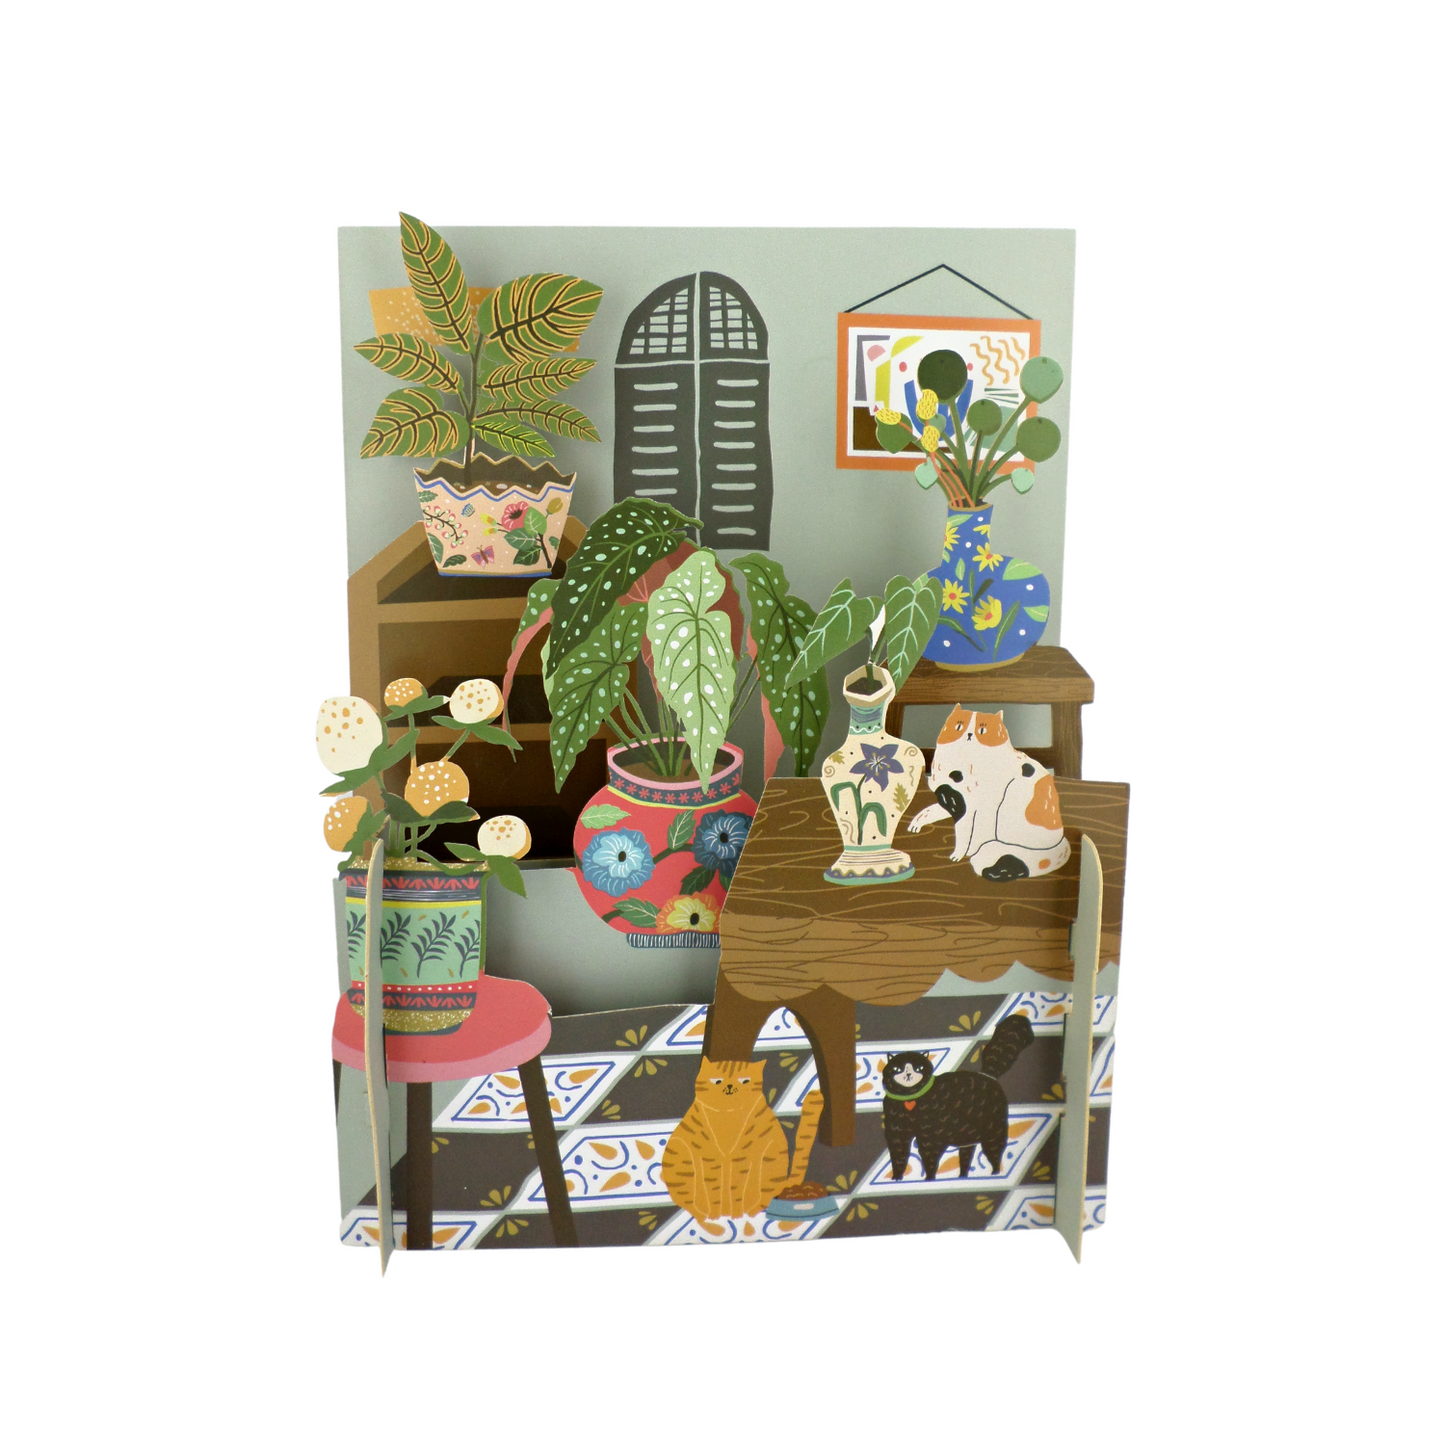 Cats & House Plants Any Occasion 3D Pop Up Greeting Card